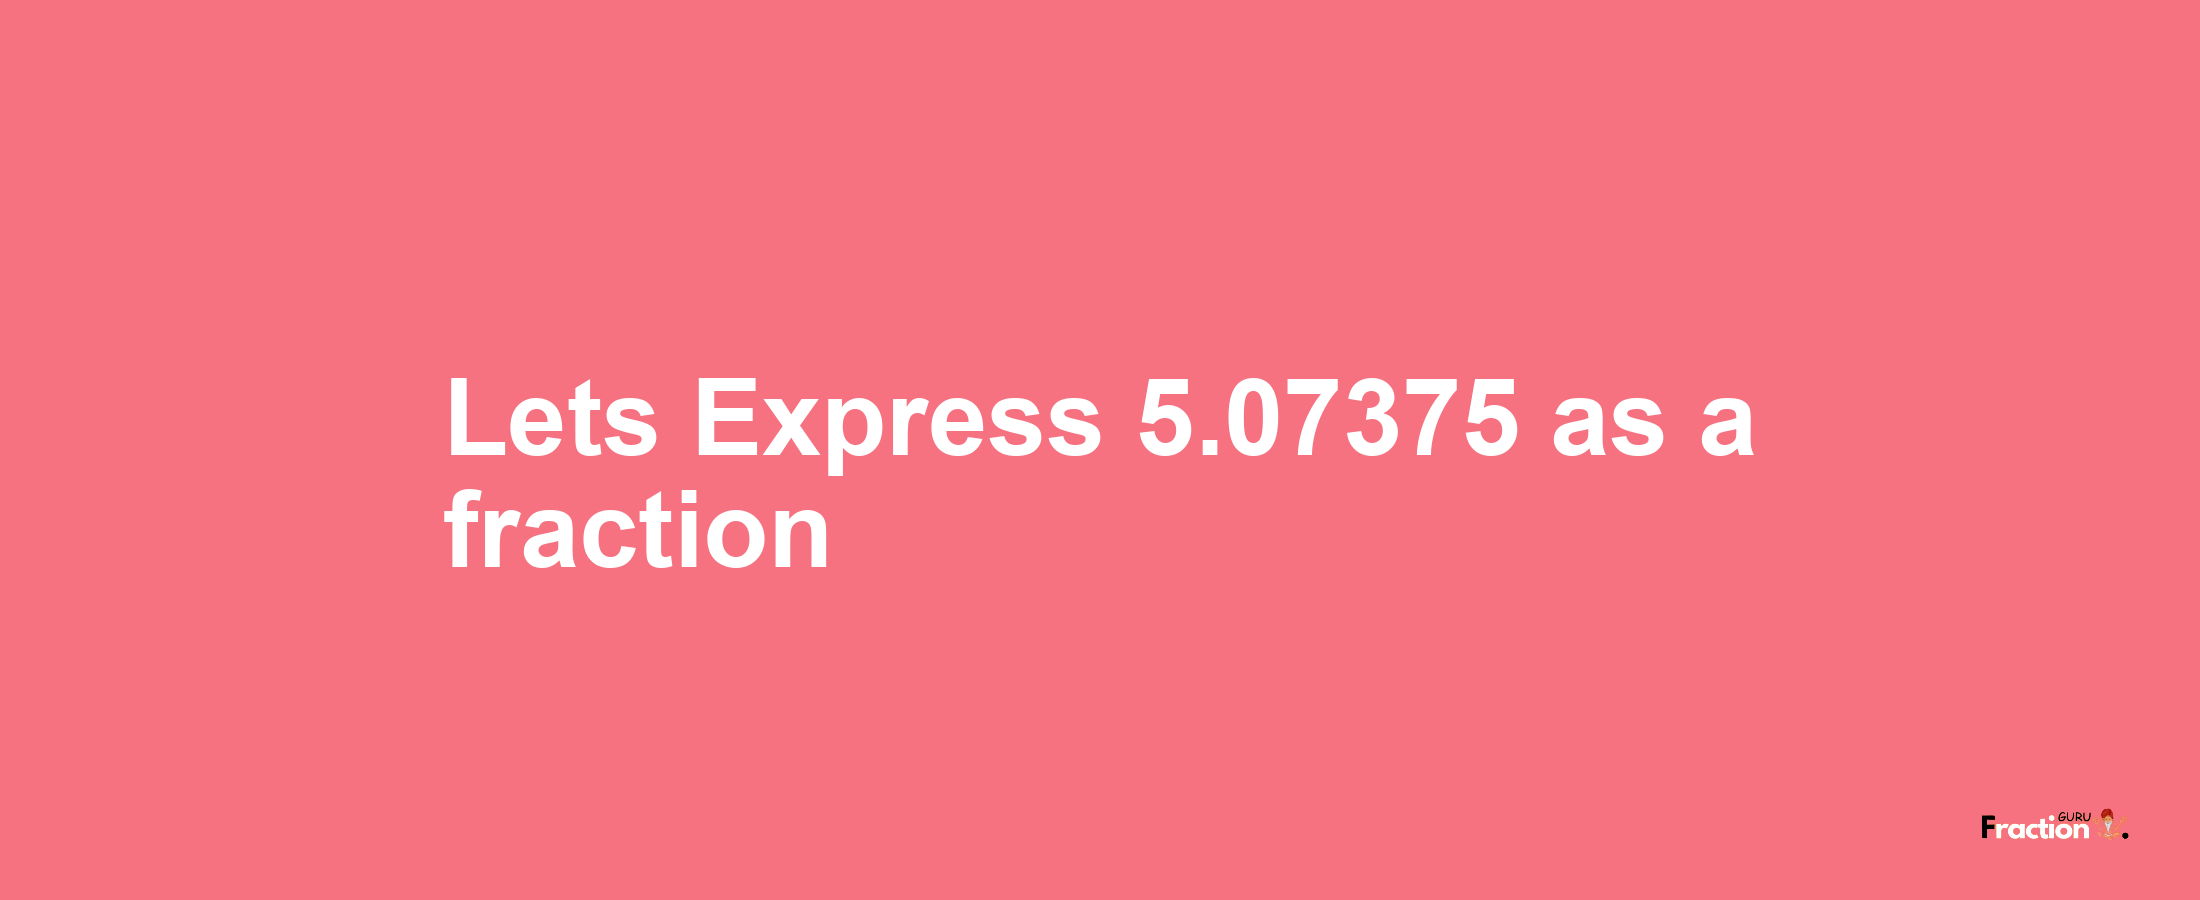 Lets Express 5.07375 as afraction